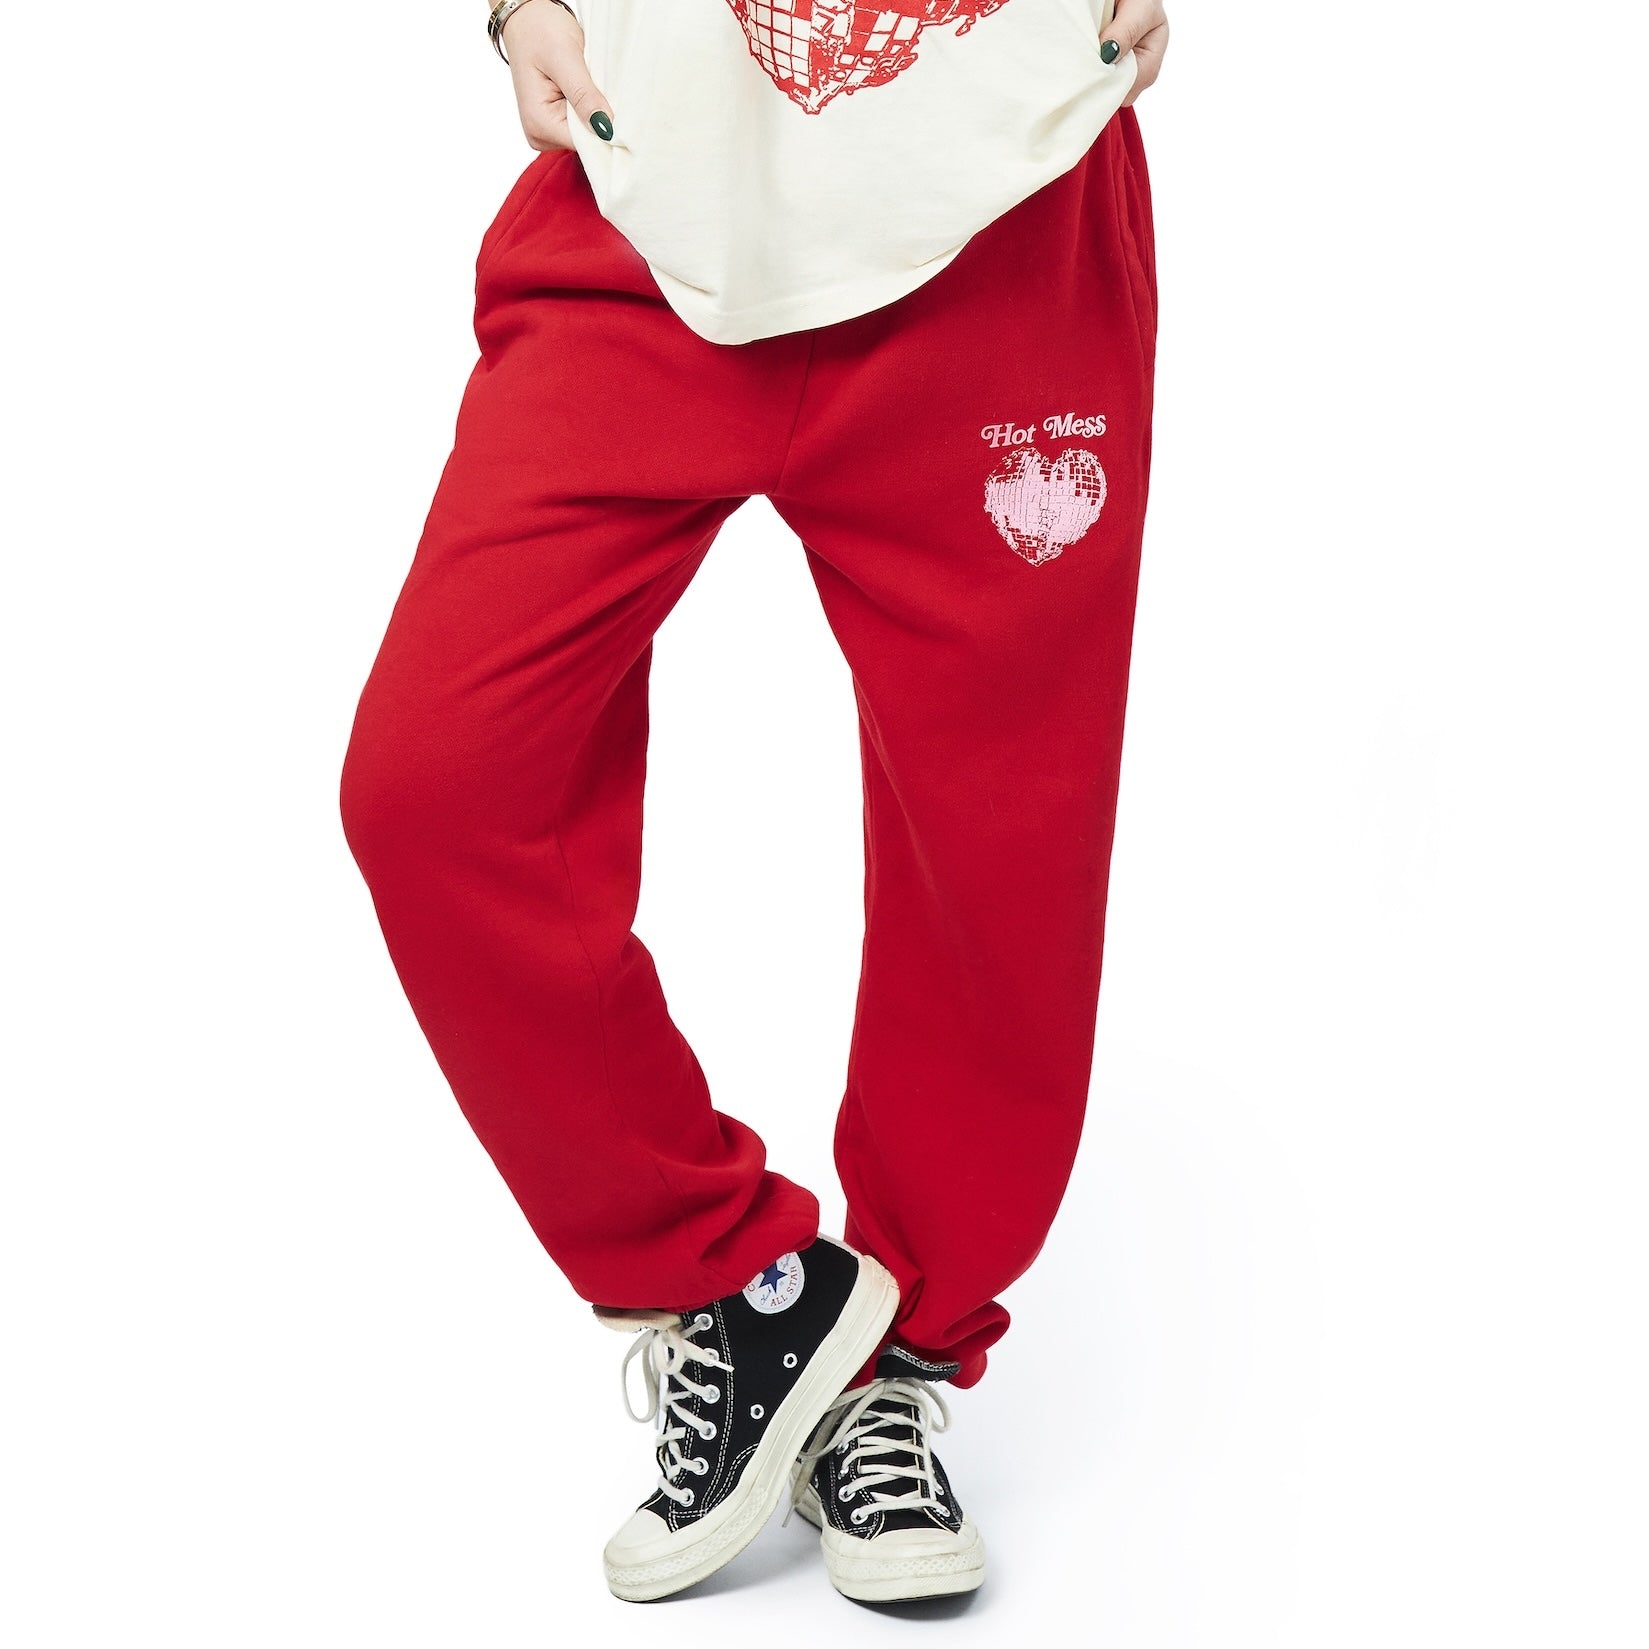 HOT MESS, IT'S A LIFESTYLE SWEATPANTS (RED)